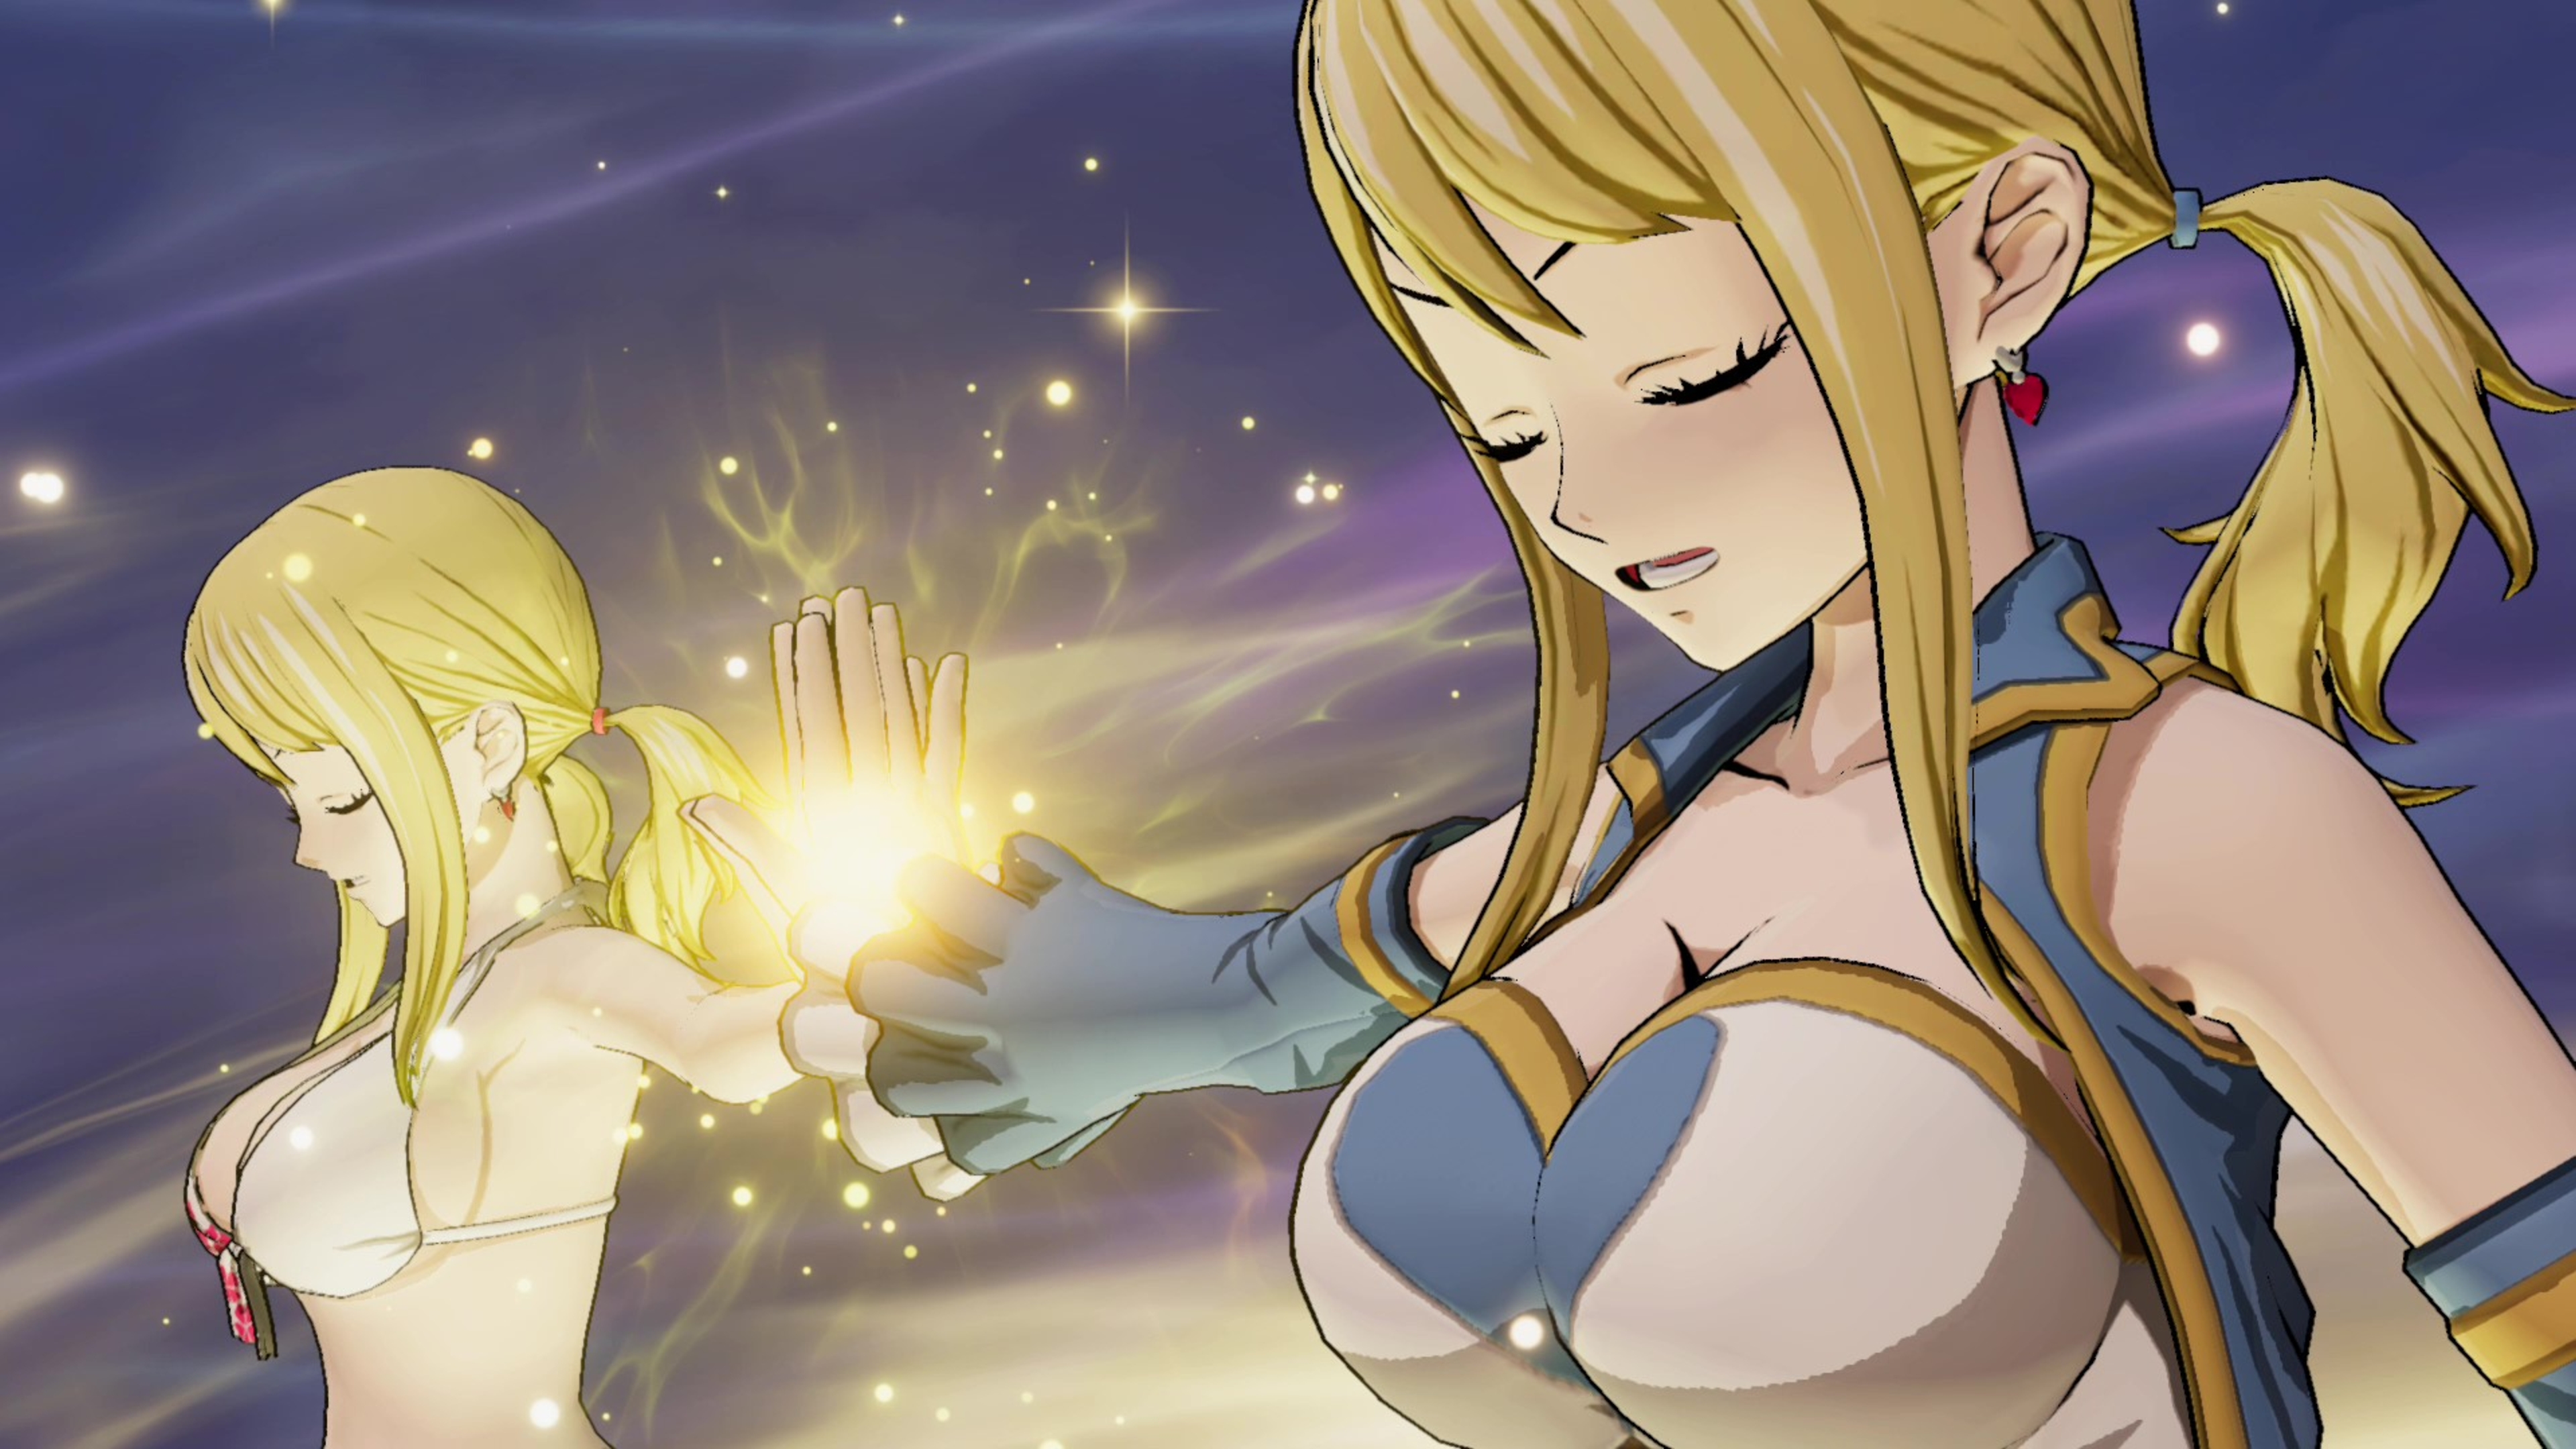 Fairy Tail - Lucy